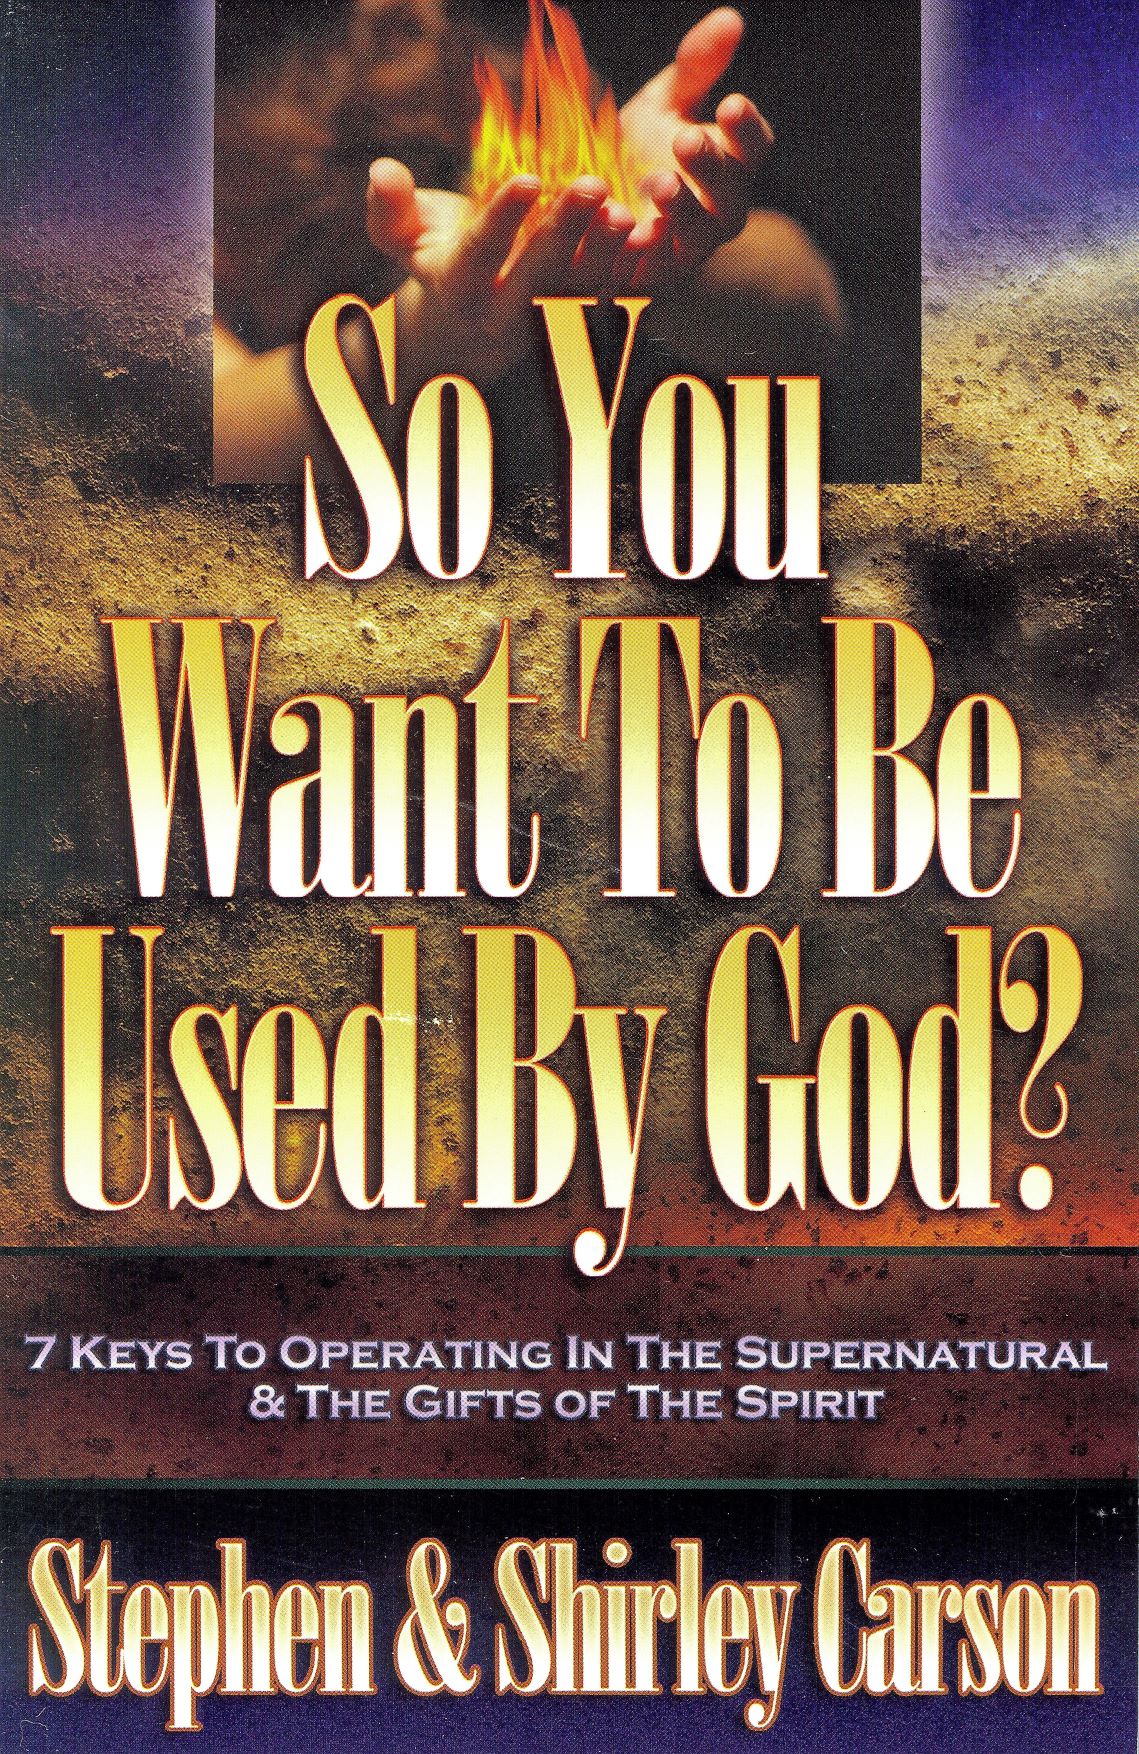 So You Want To Be Used By God? - Shirley Carson